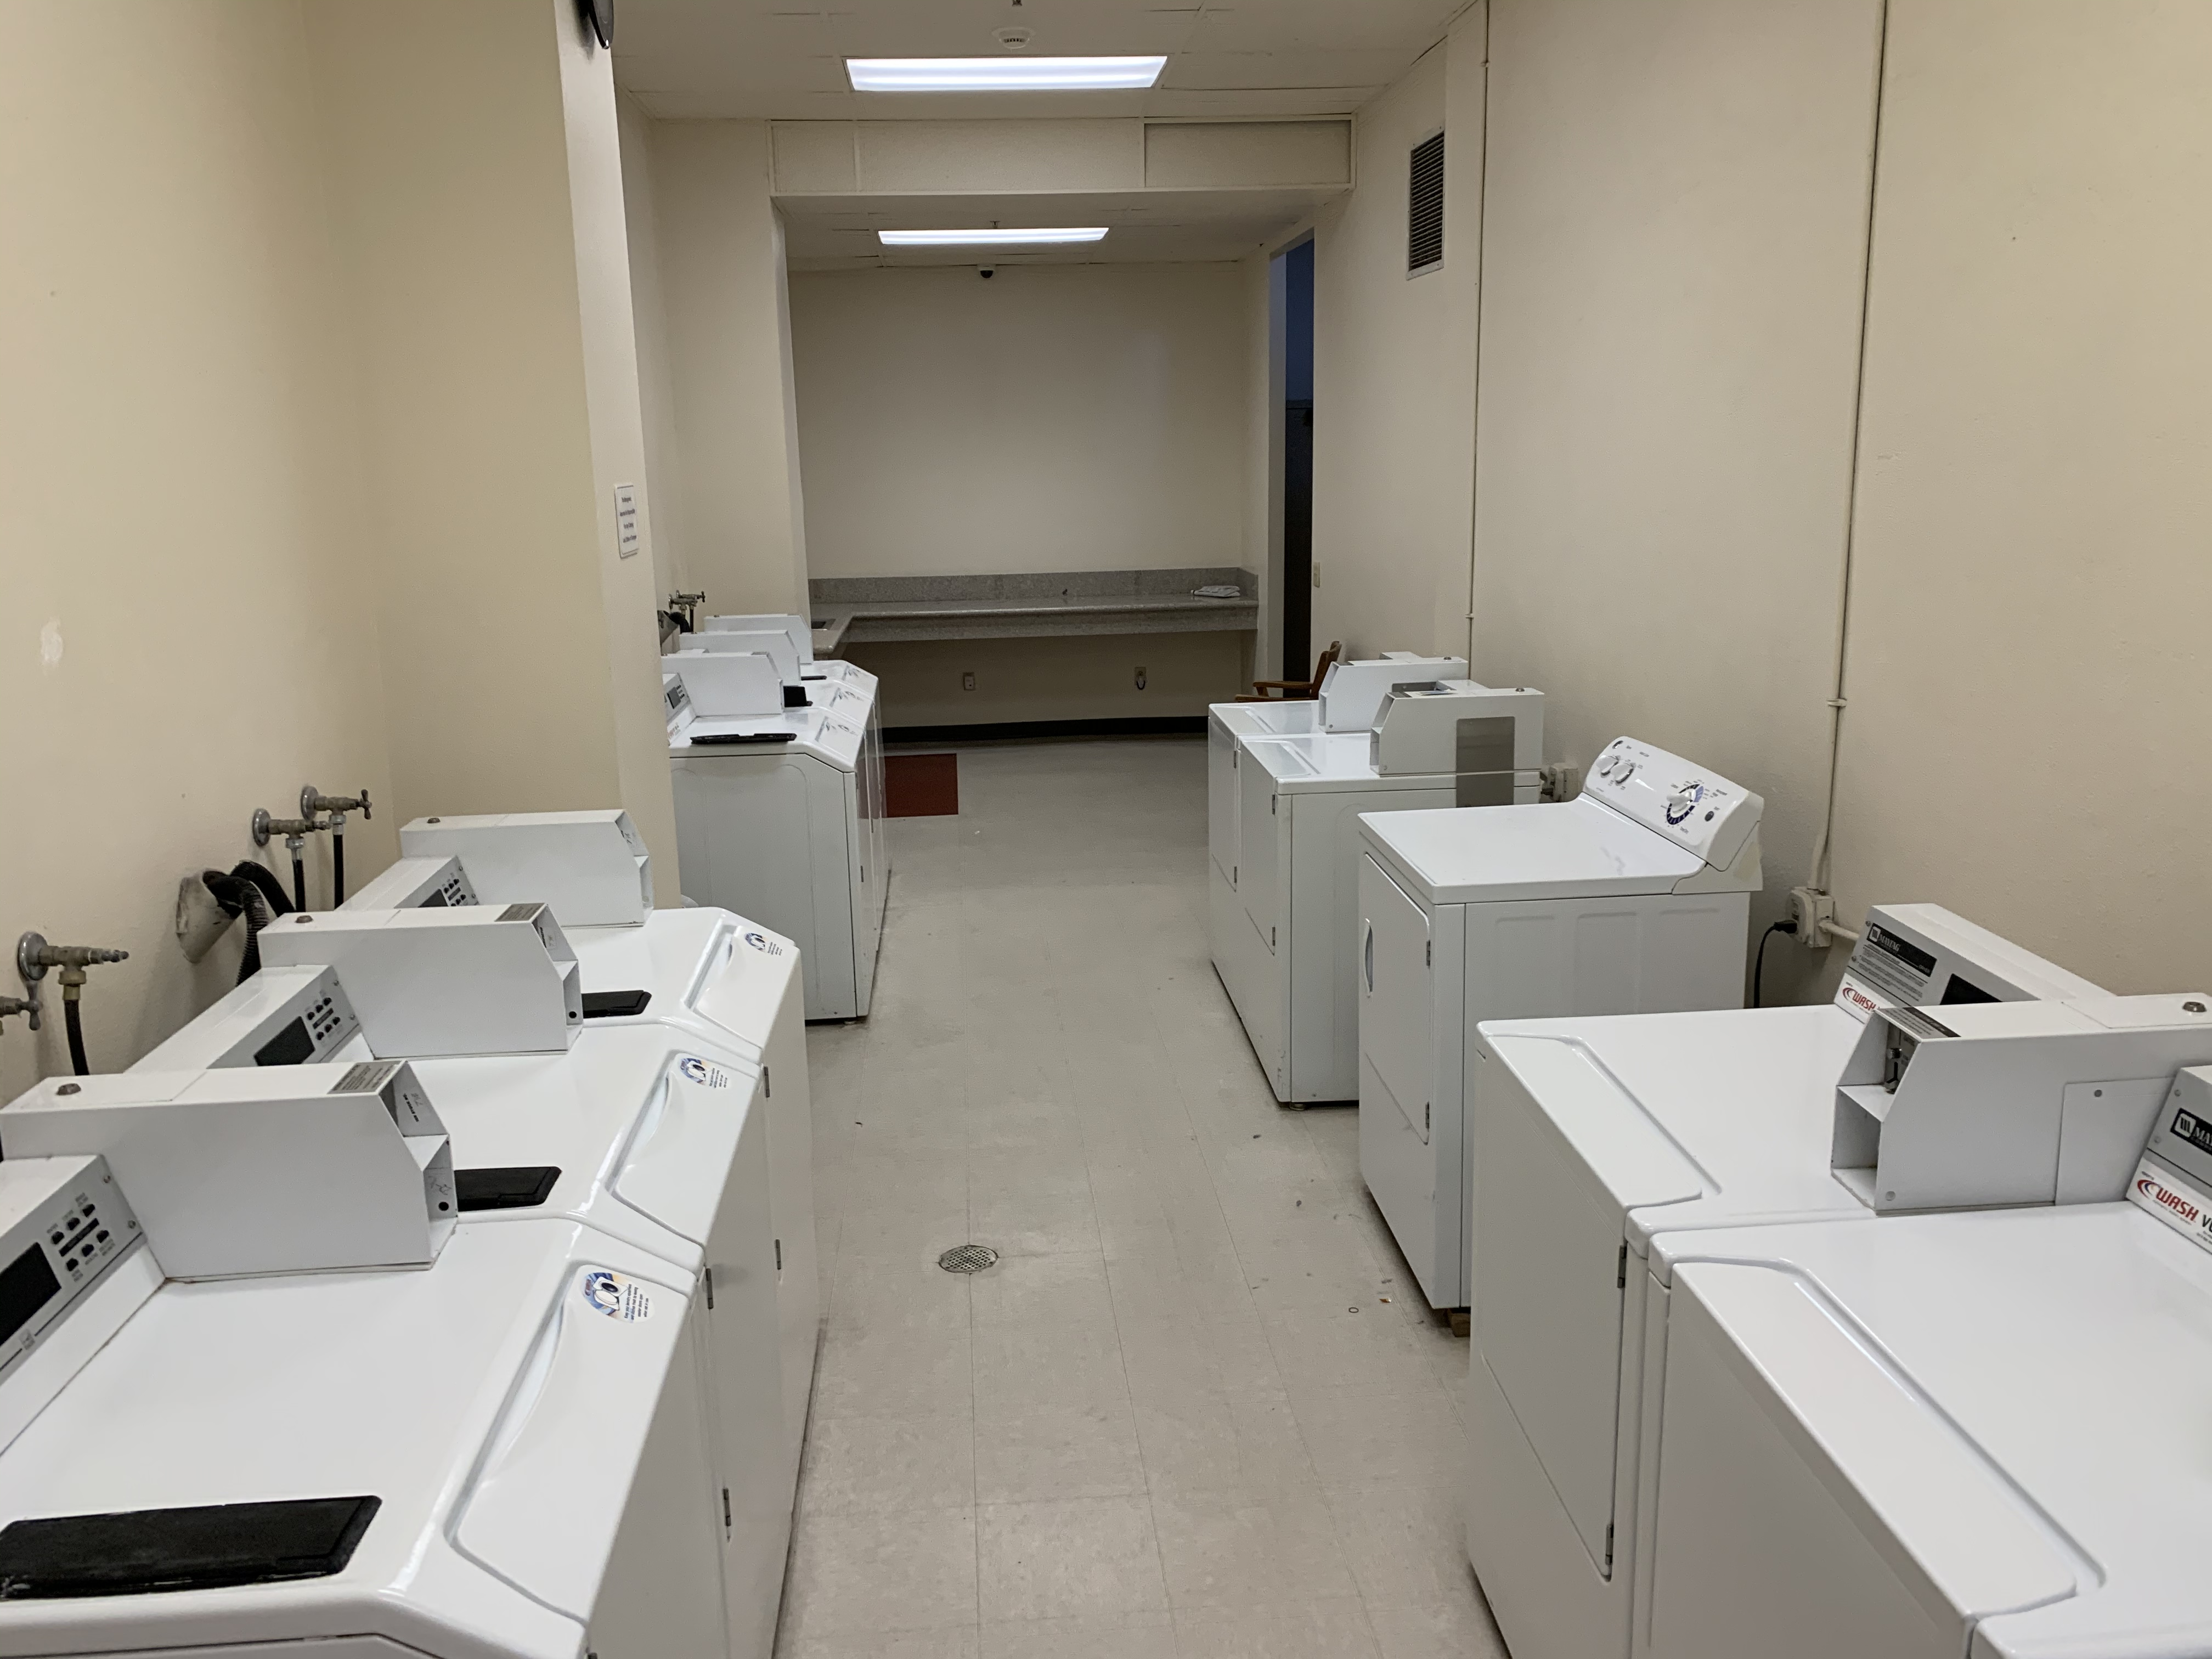 Image of the building laundry room